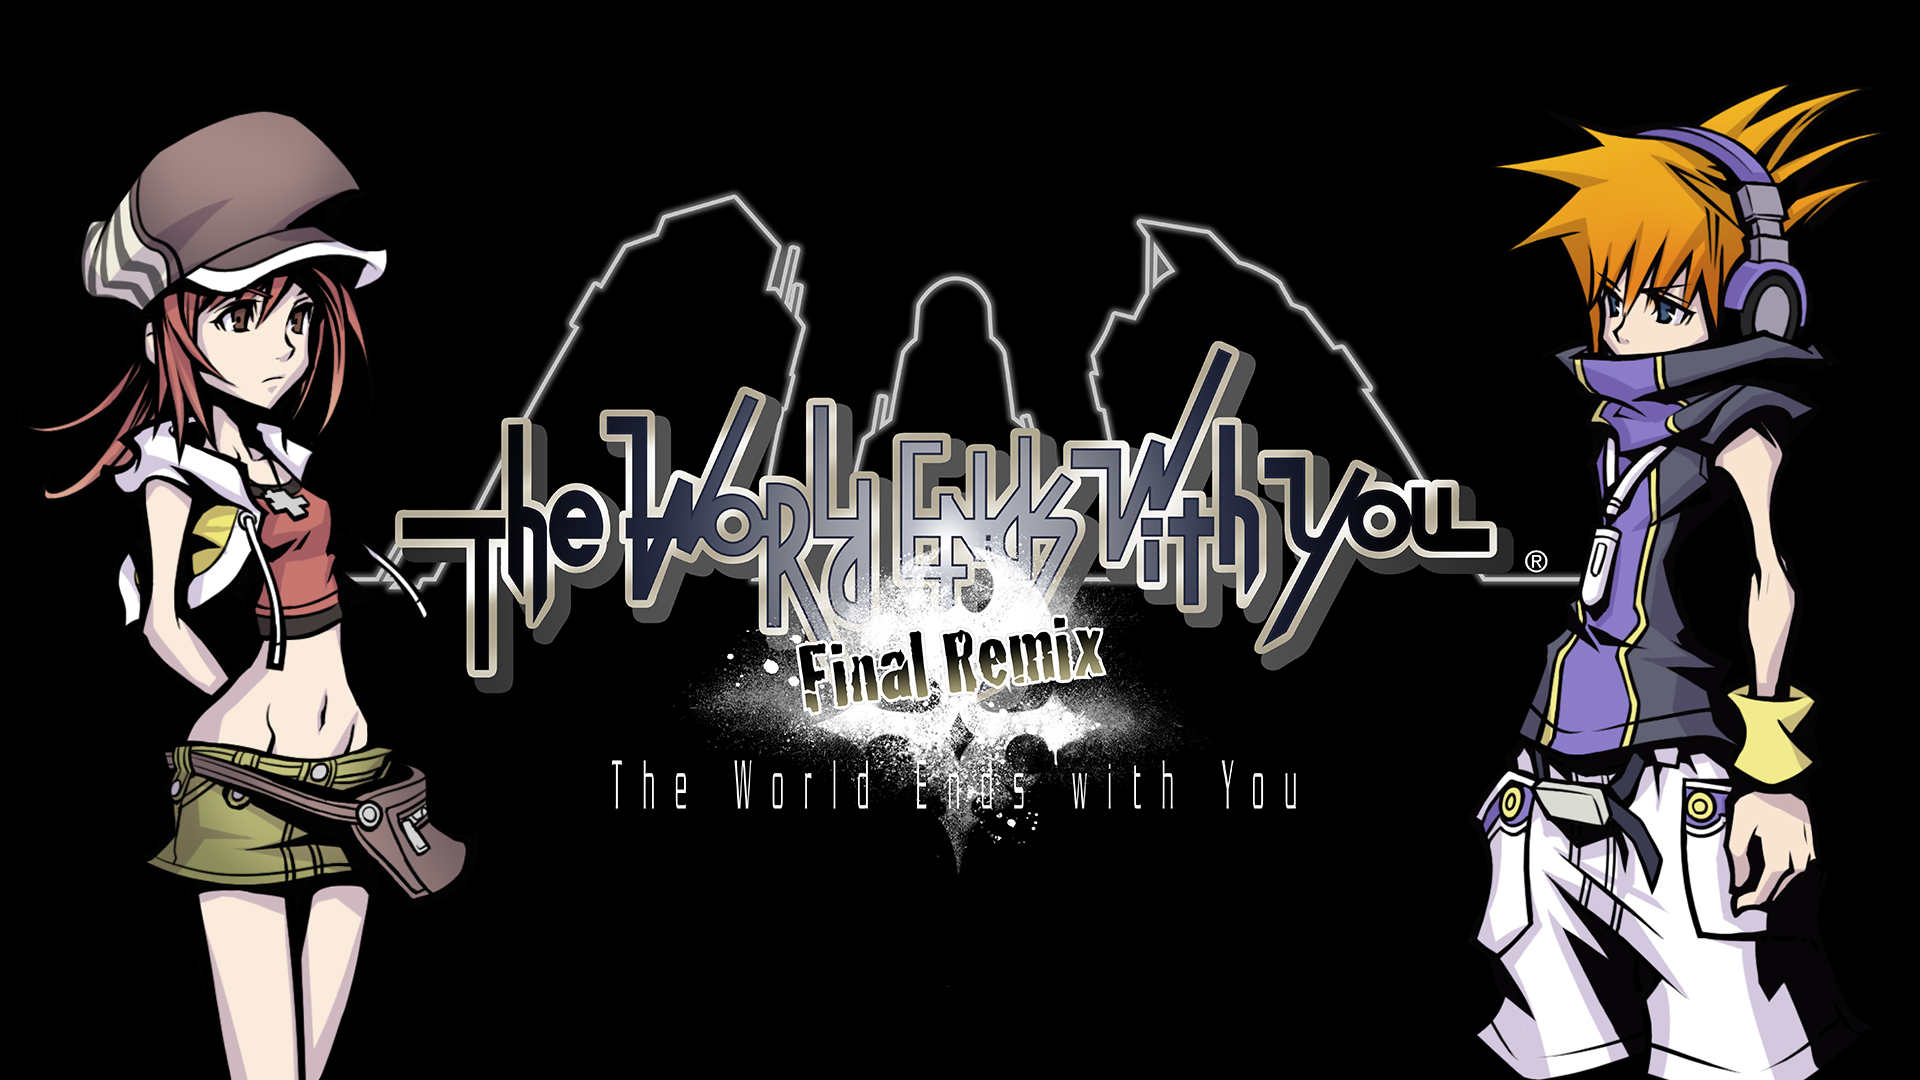 World Ends With You Final Remix Logo - HD Wallpaper 